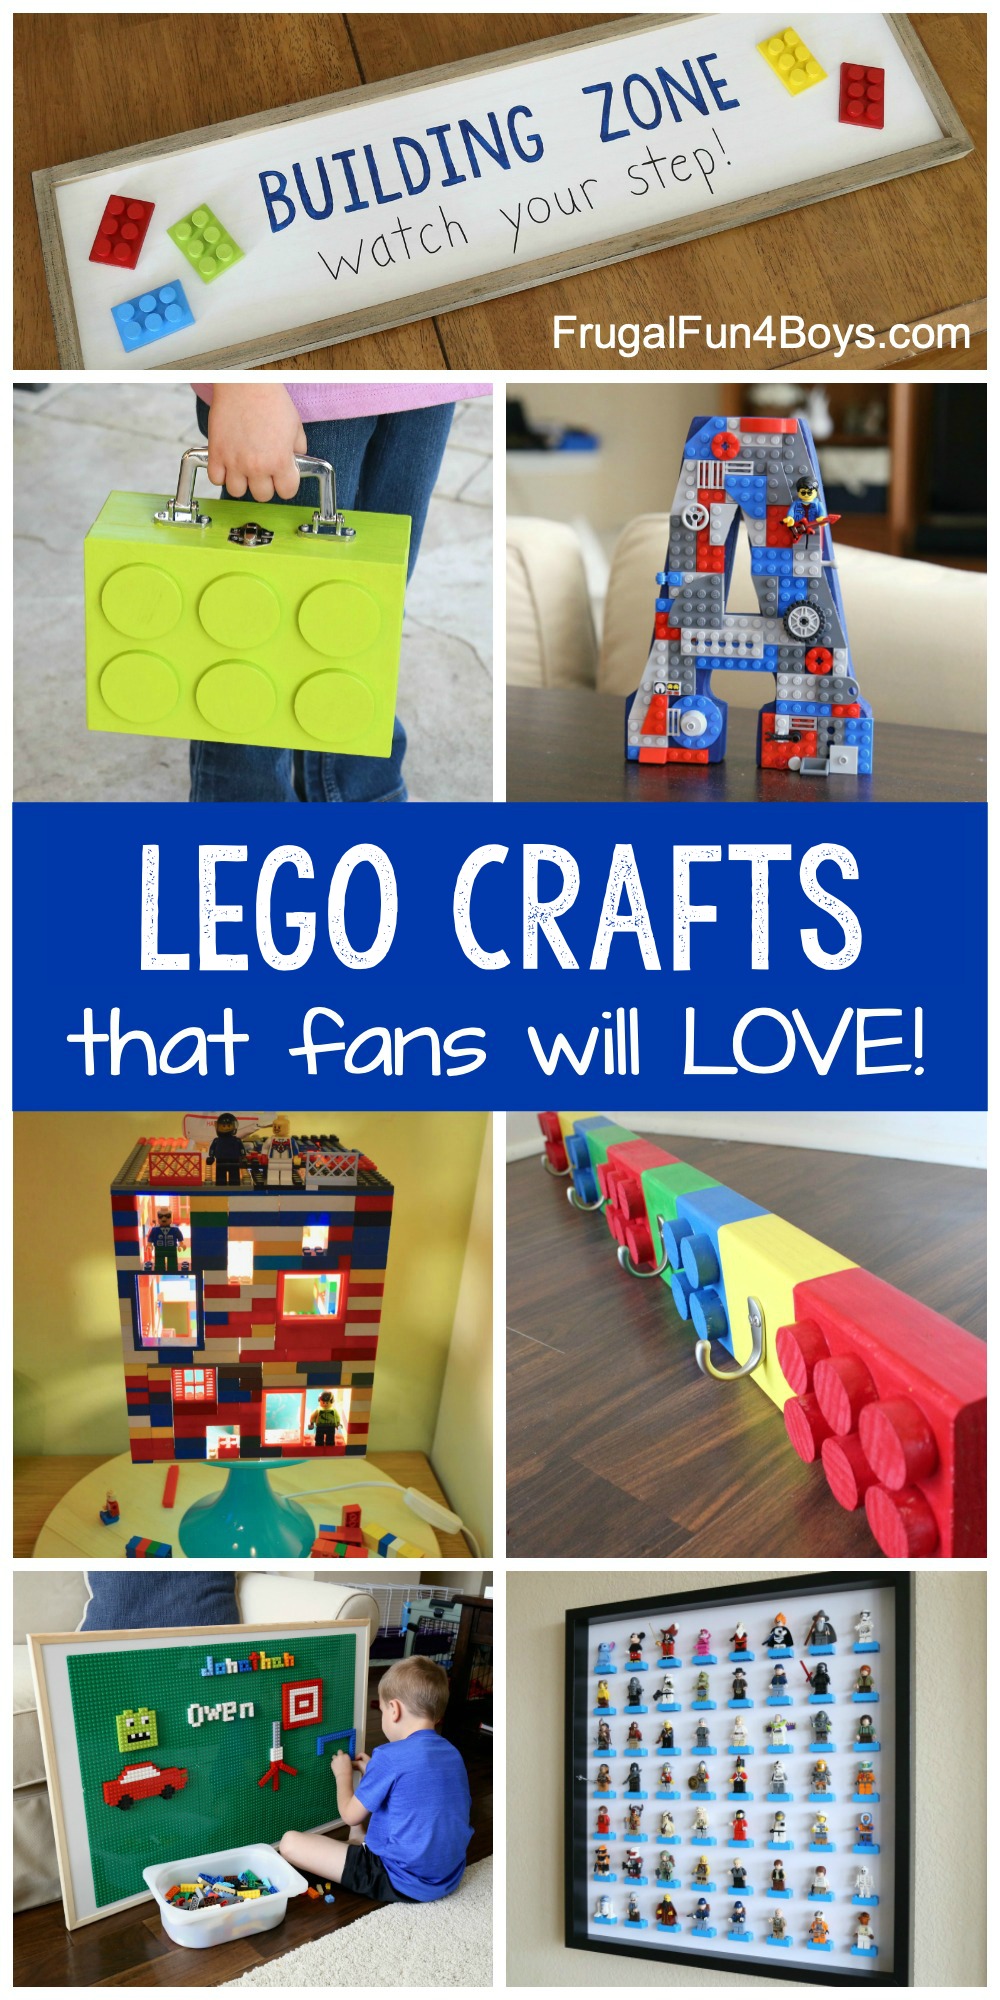 Awesome DIY LEGO Crafts and Room Decor Projects - Frugal Fun For Boys